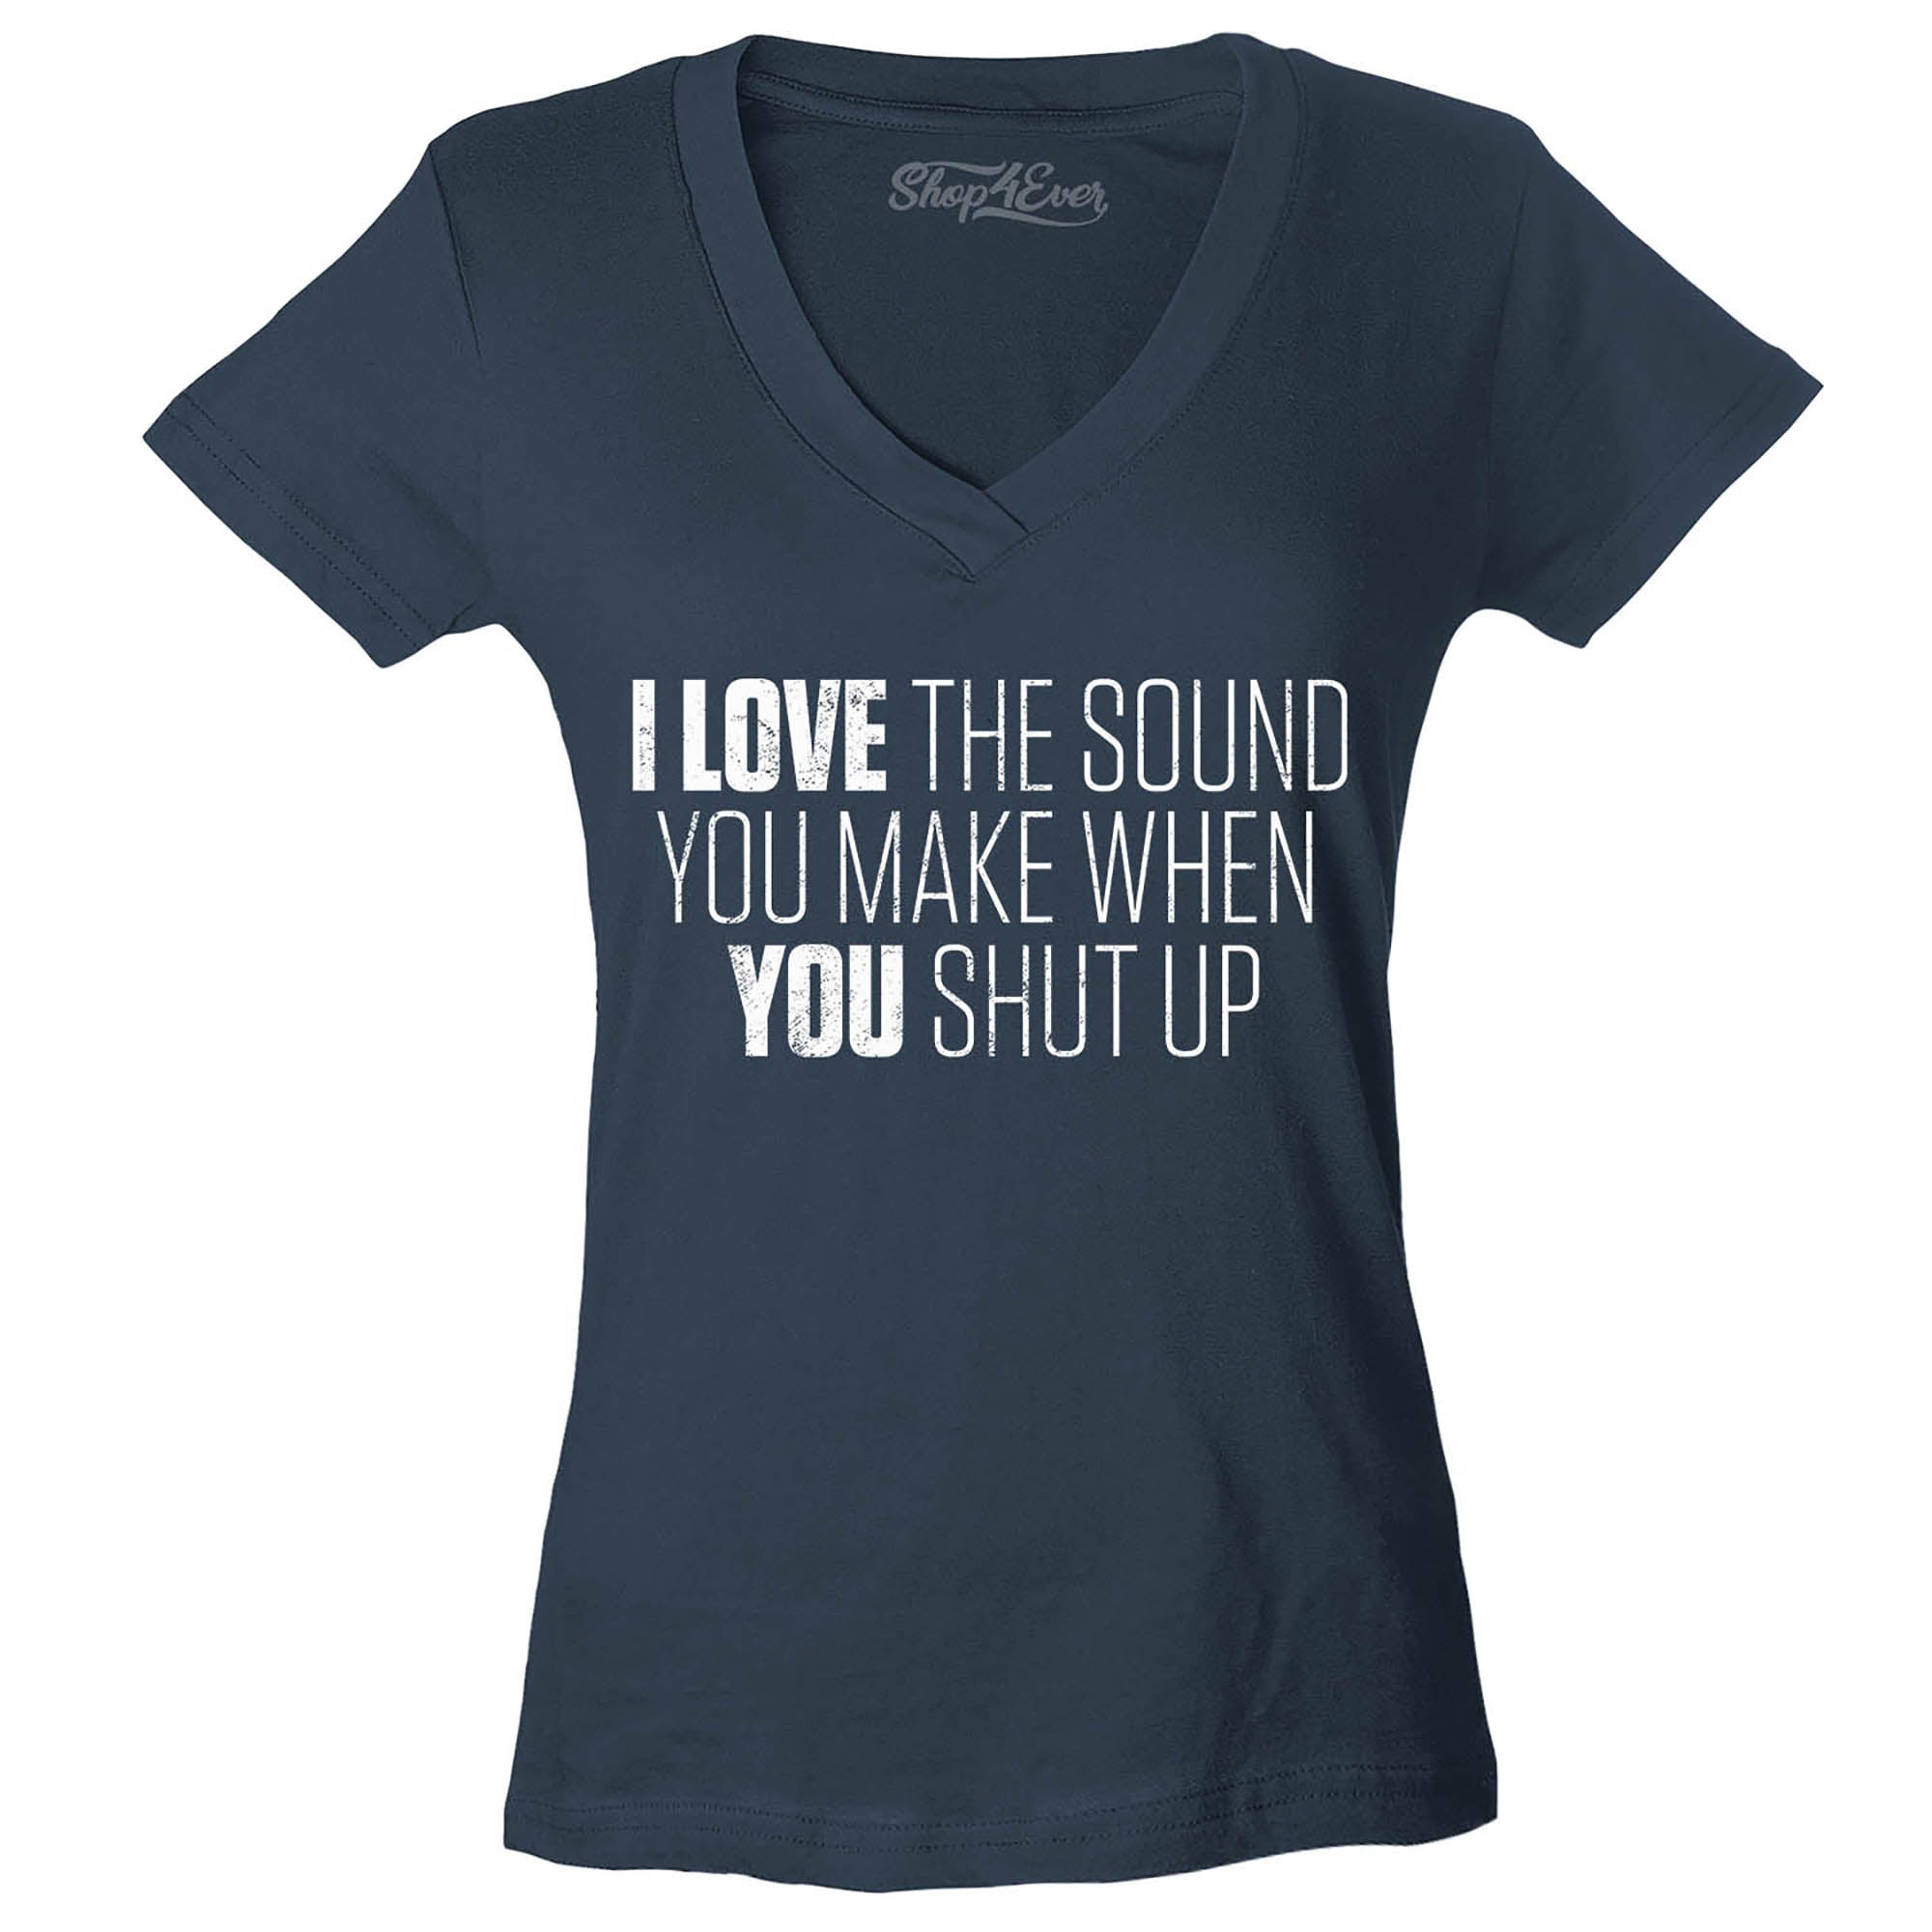 Love The Sounds You Make When You Shut Up Women's V-Neck T-Shirt Slim Fit